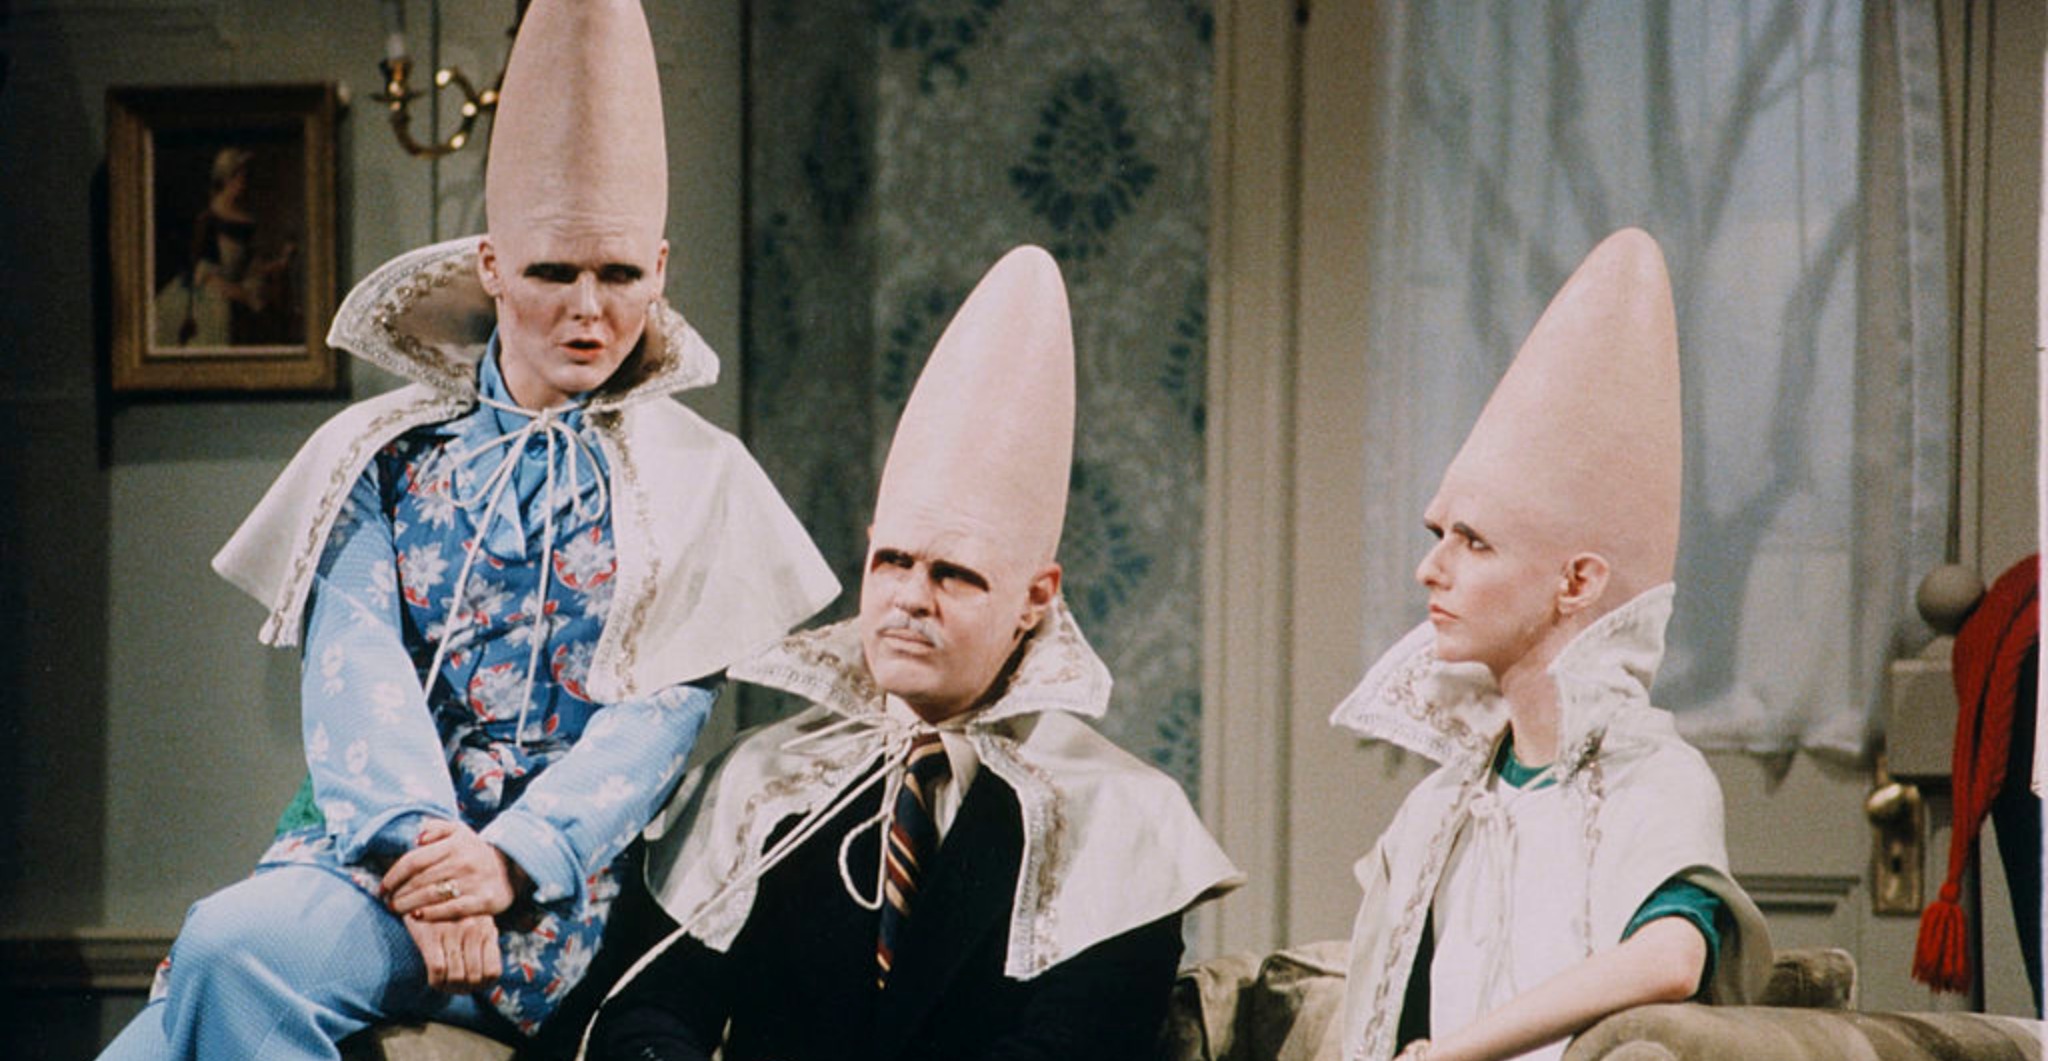 ane Curtin as Prymaat Conehead, Dan Aykroyd as Beldar Conehead, Laraine Newman as Connie Conehead during the 'The Coneheads At Home' skit on January 15, 1977 (Photo by NBCU Photo Bank/NBCUniversal via Getty Images via Getty Images)